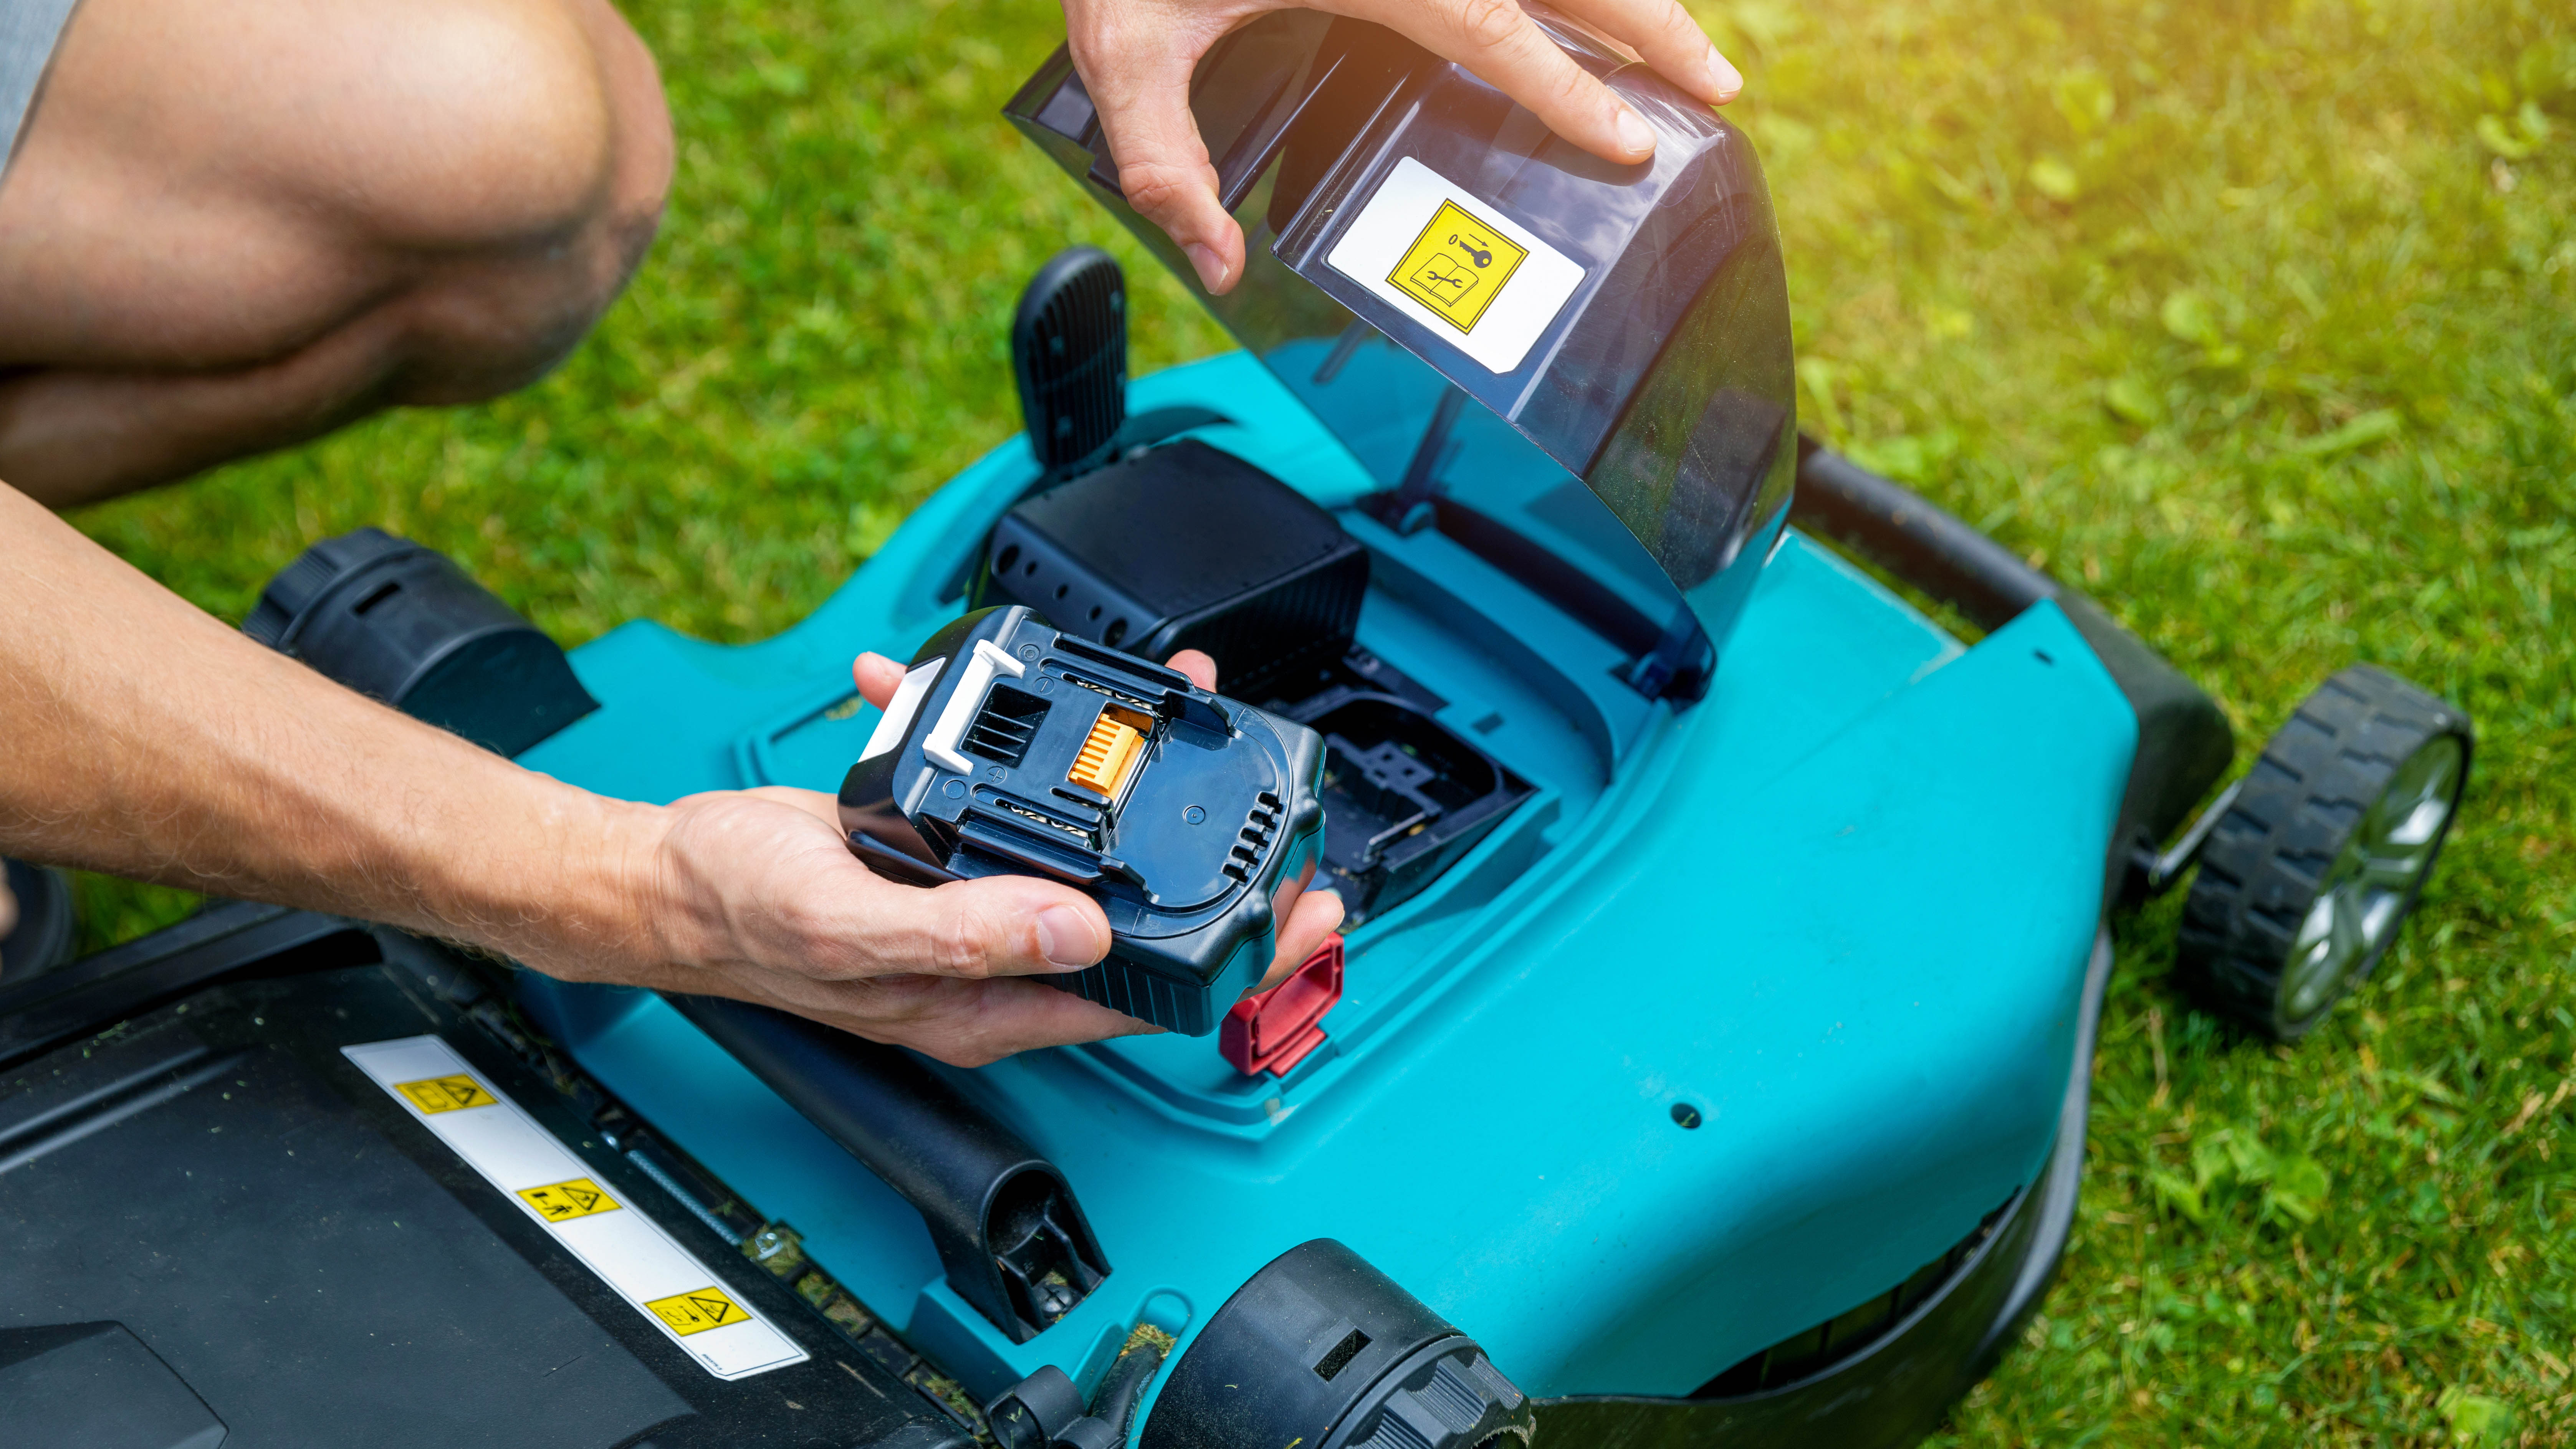 Removing battery from cordless lawn mower